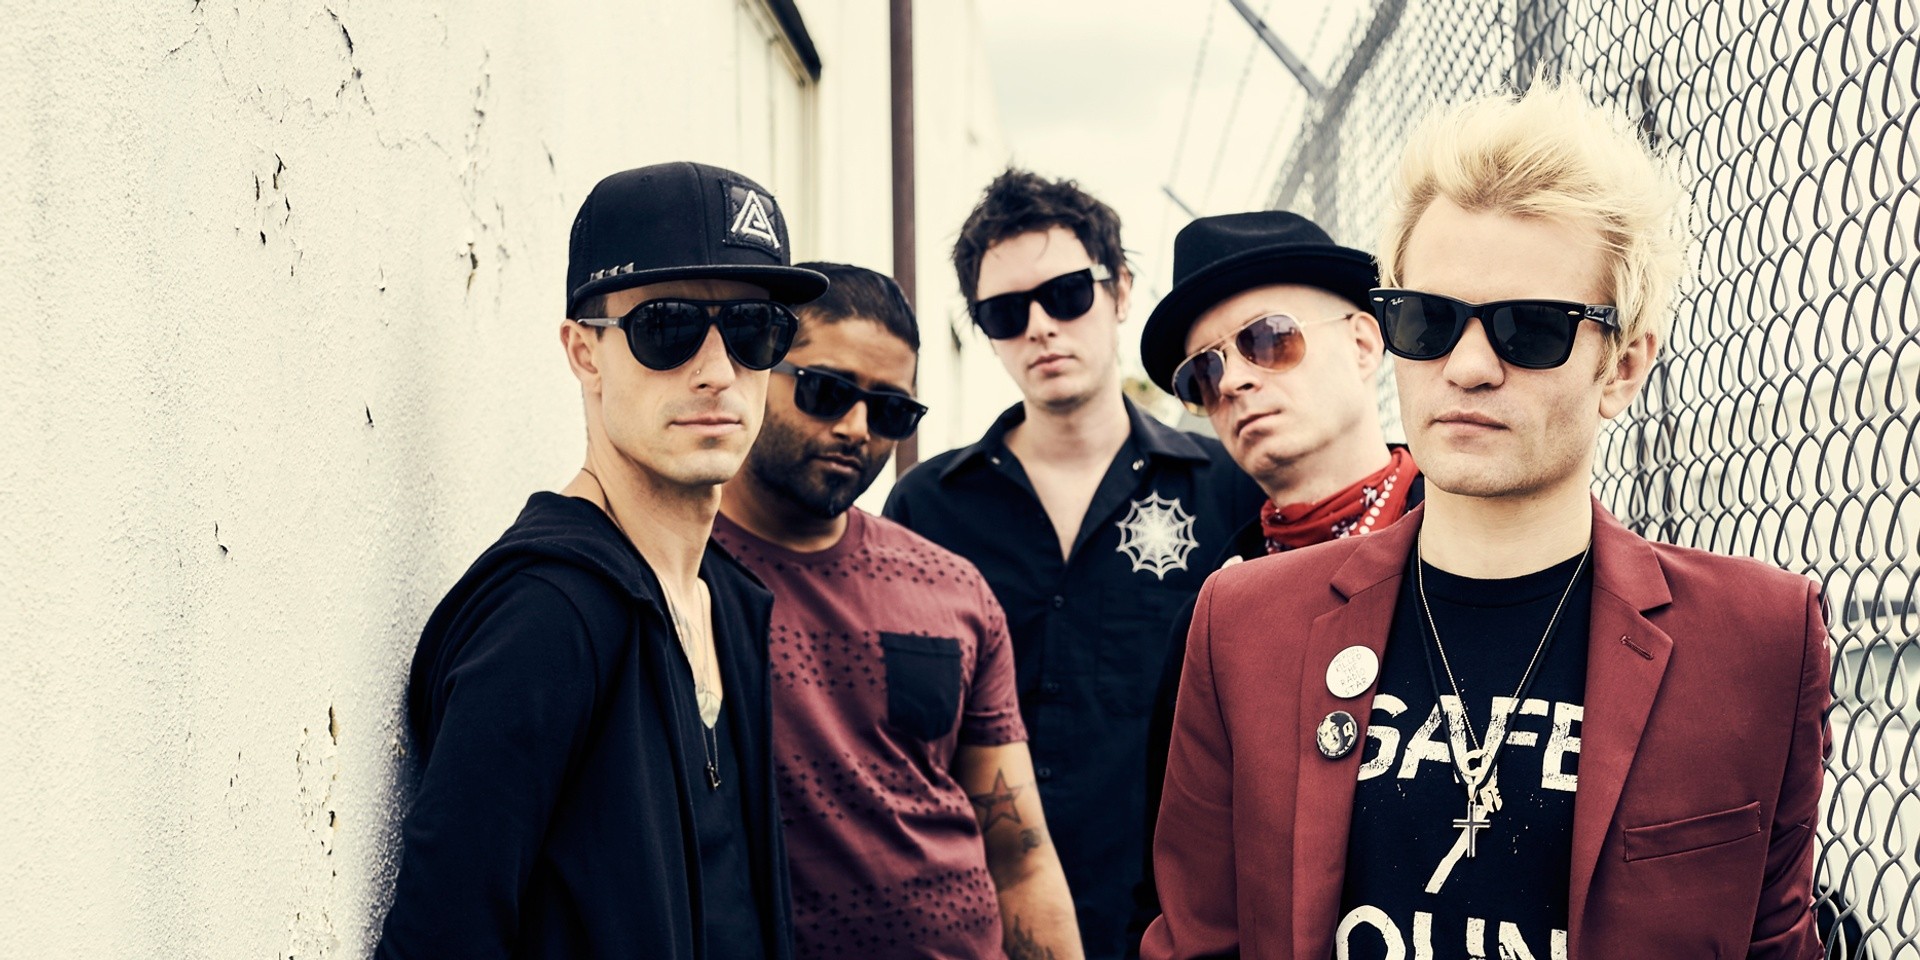 Sum 41's Deryck Whibley tells us the stories behind his band's discography